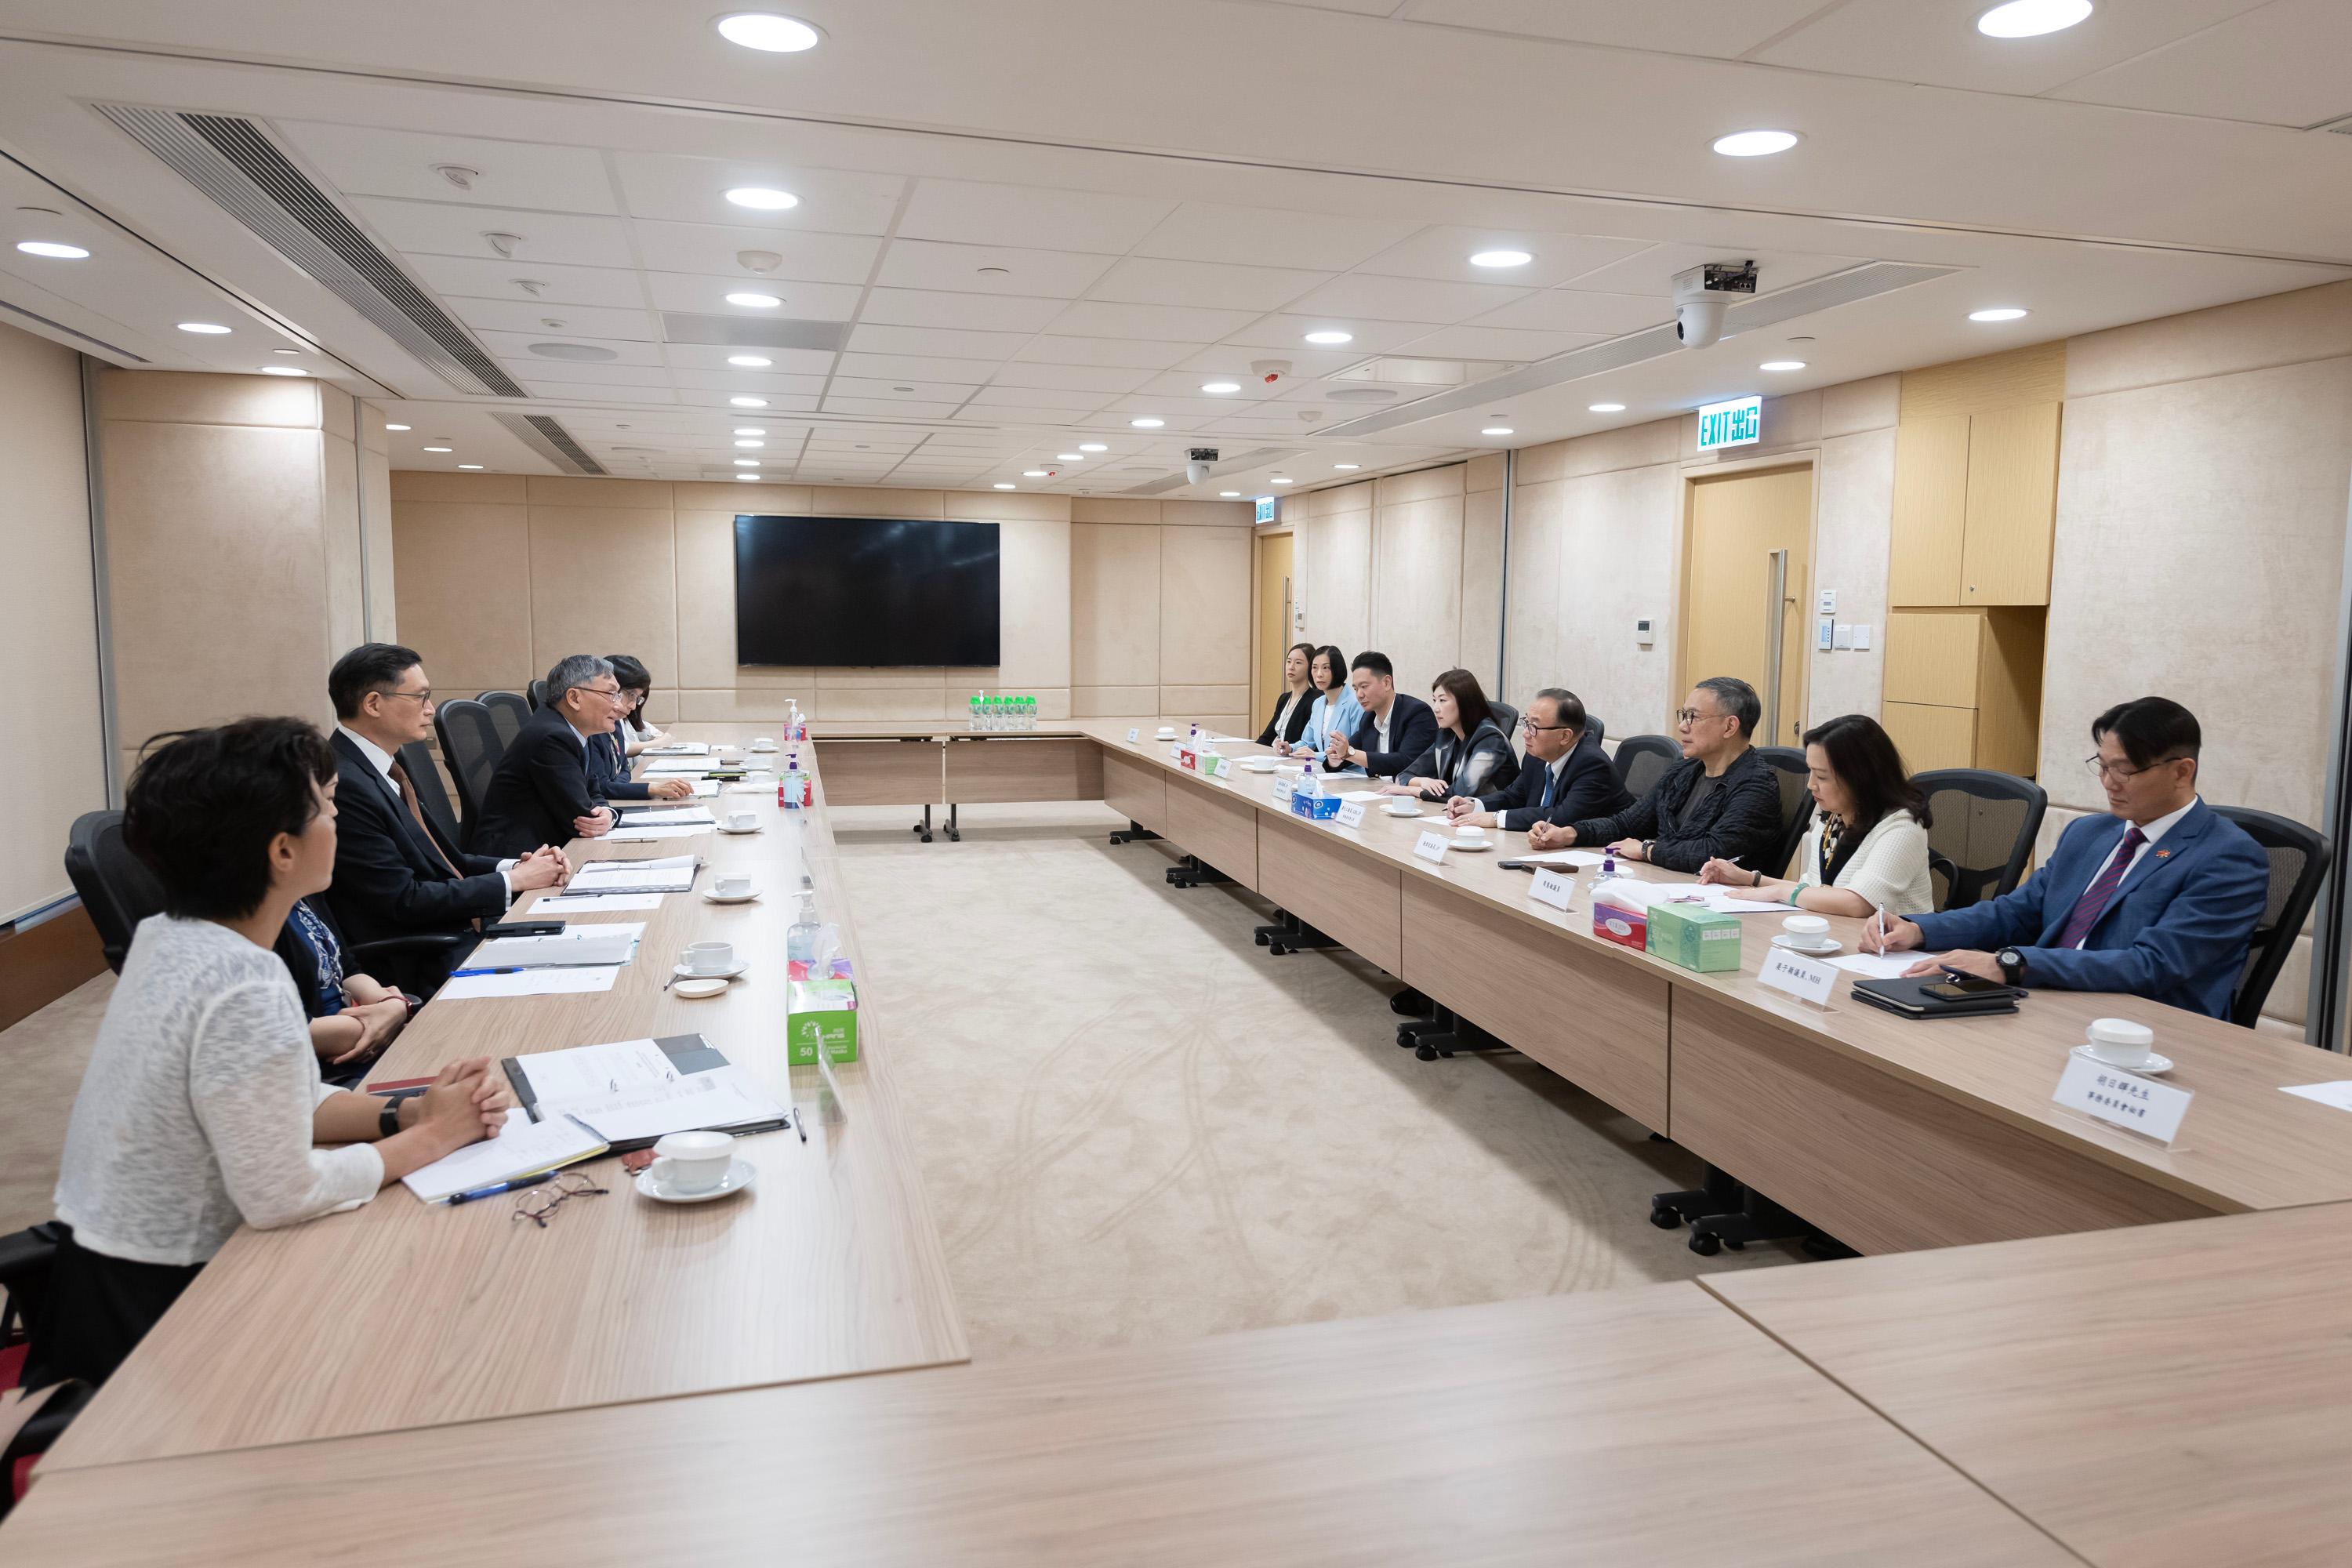 The Legislative Council (LegCo) Panel on Administration of Justice and Legal Services visits the Judiciary at the High Court Building today (June 2) to meet with members of the Judiciary and toured its facilities. Photo shows LegCo Members meeting with members of the Judiciary.